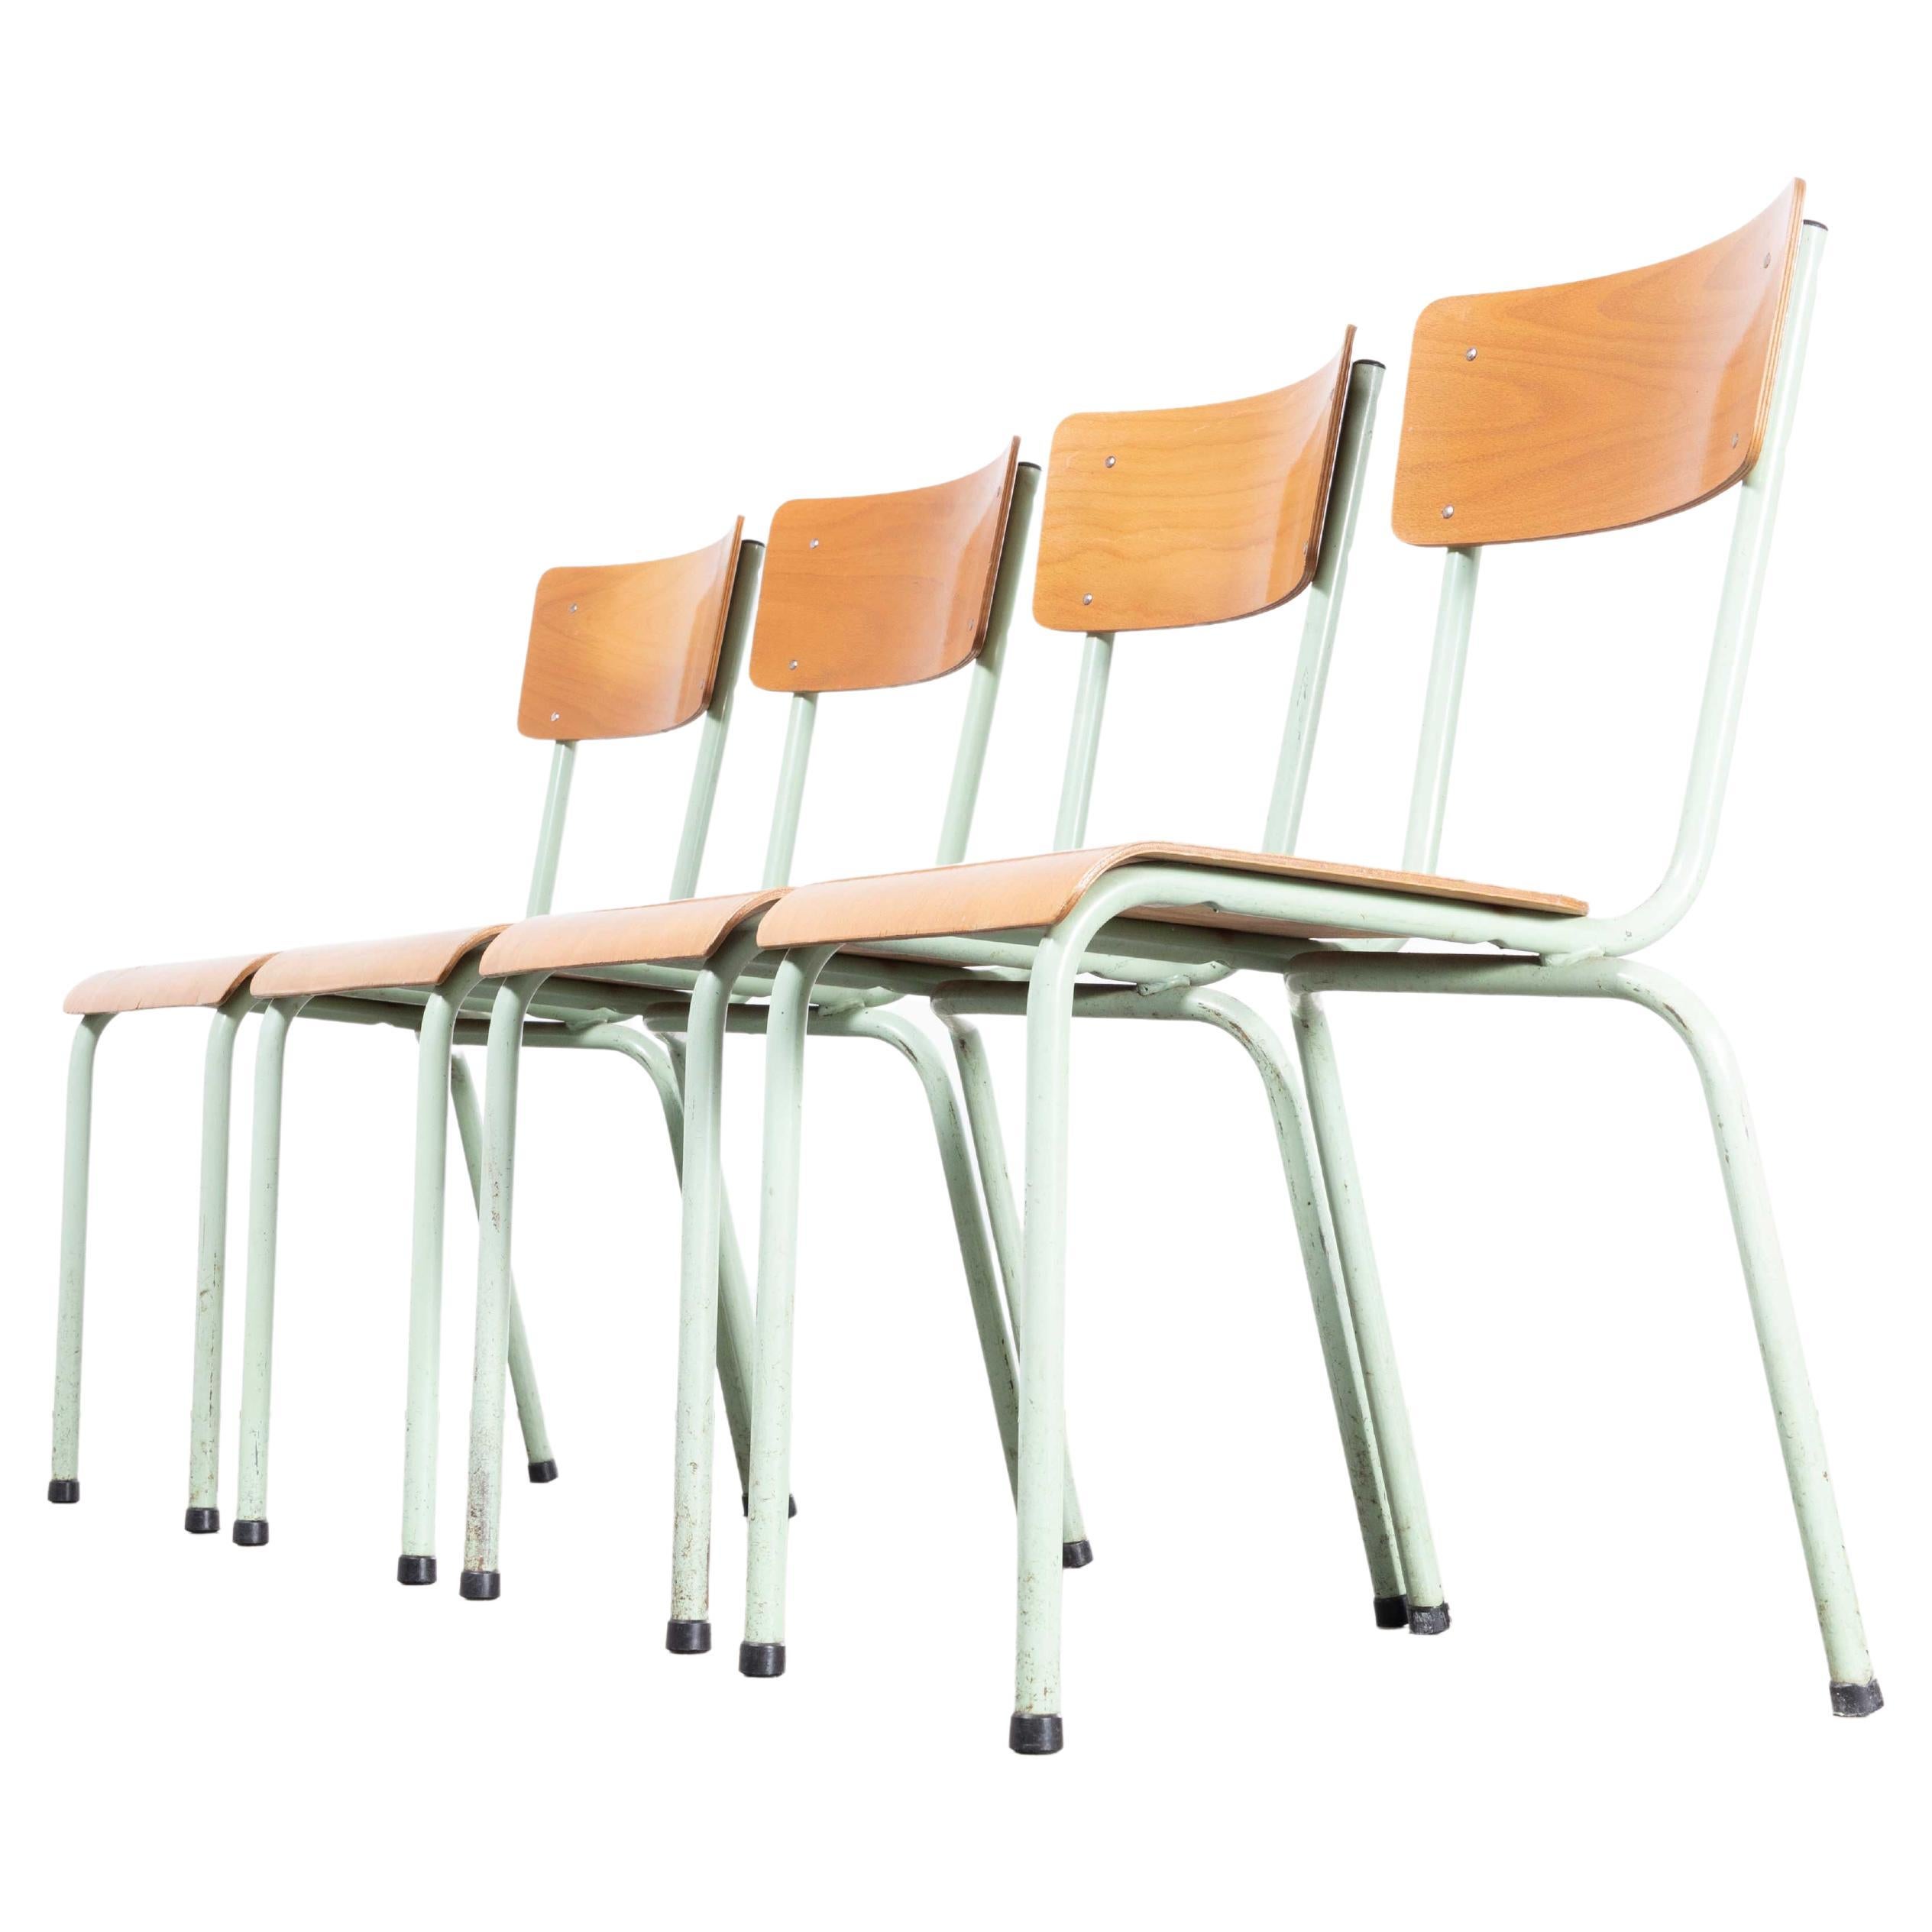 1960’s Original Mint French Stacking University Chairs Wide Back - Set Of Four For Sale